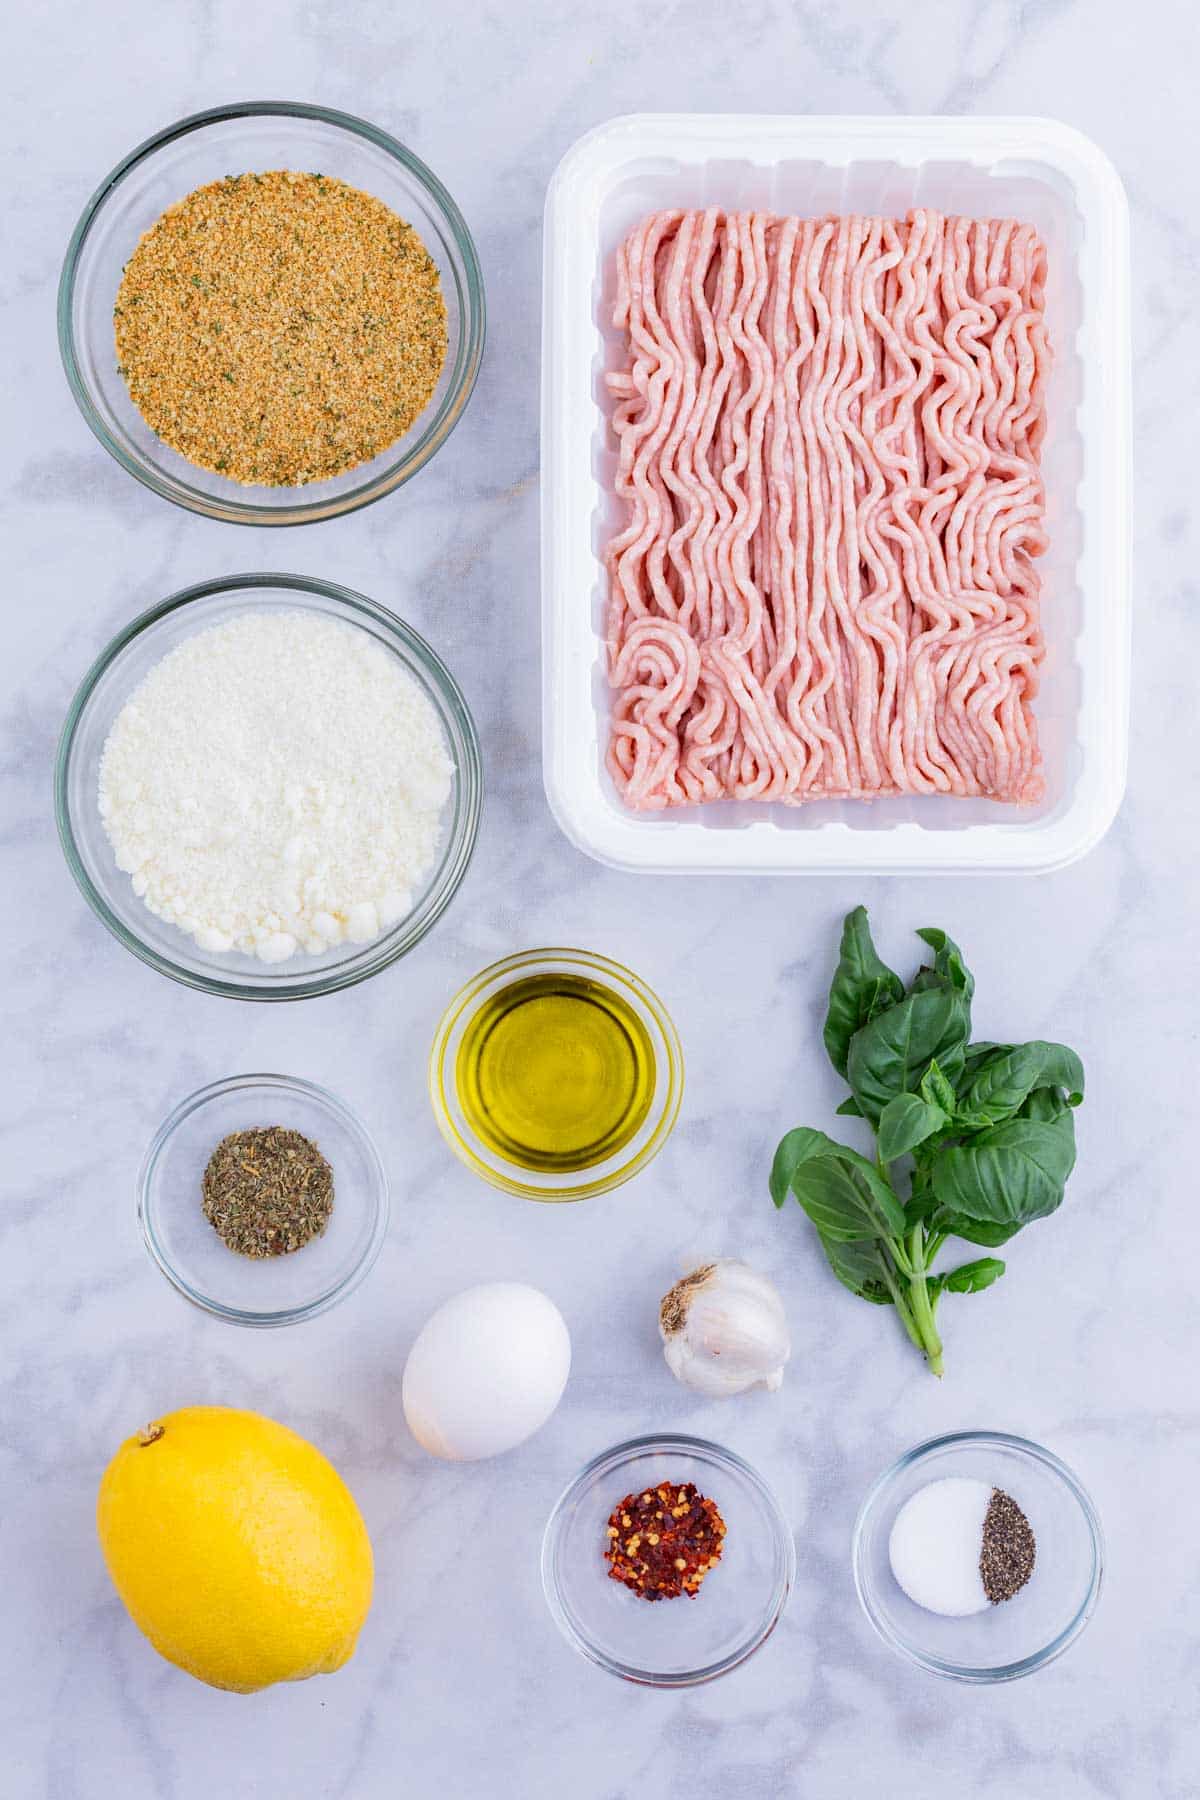 Ground chicken, breadcrumbs, Parmesan cheese, basil, and seasonings are the main ingredients for this dish.